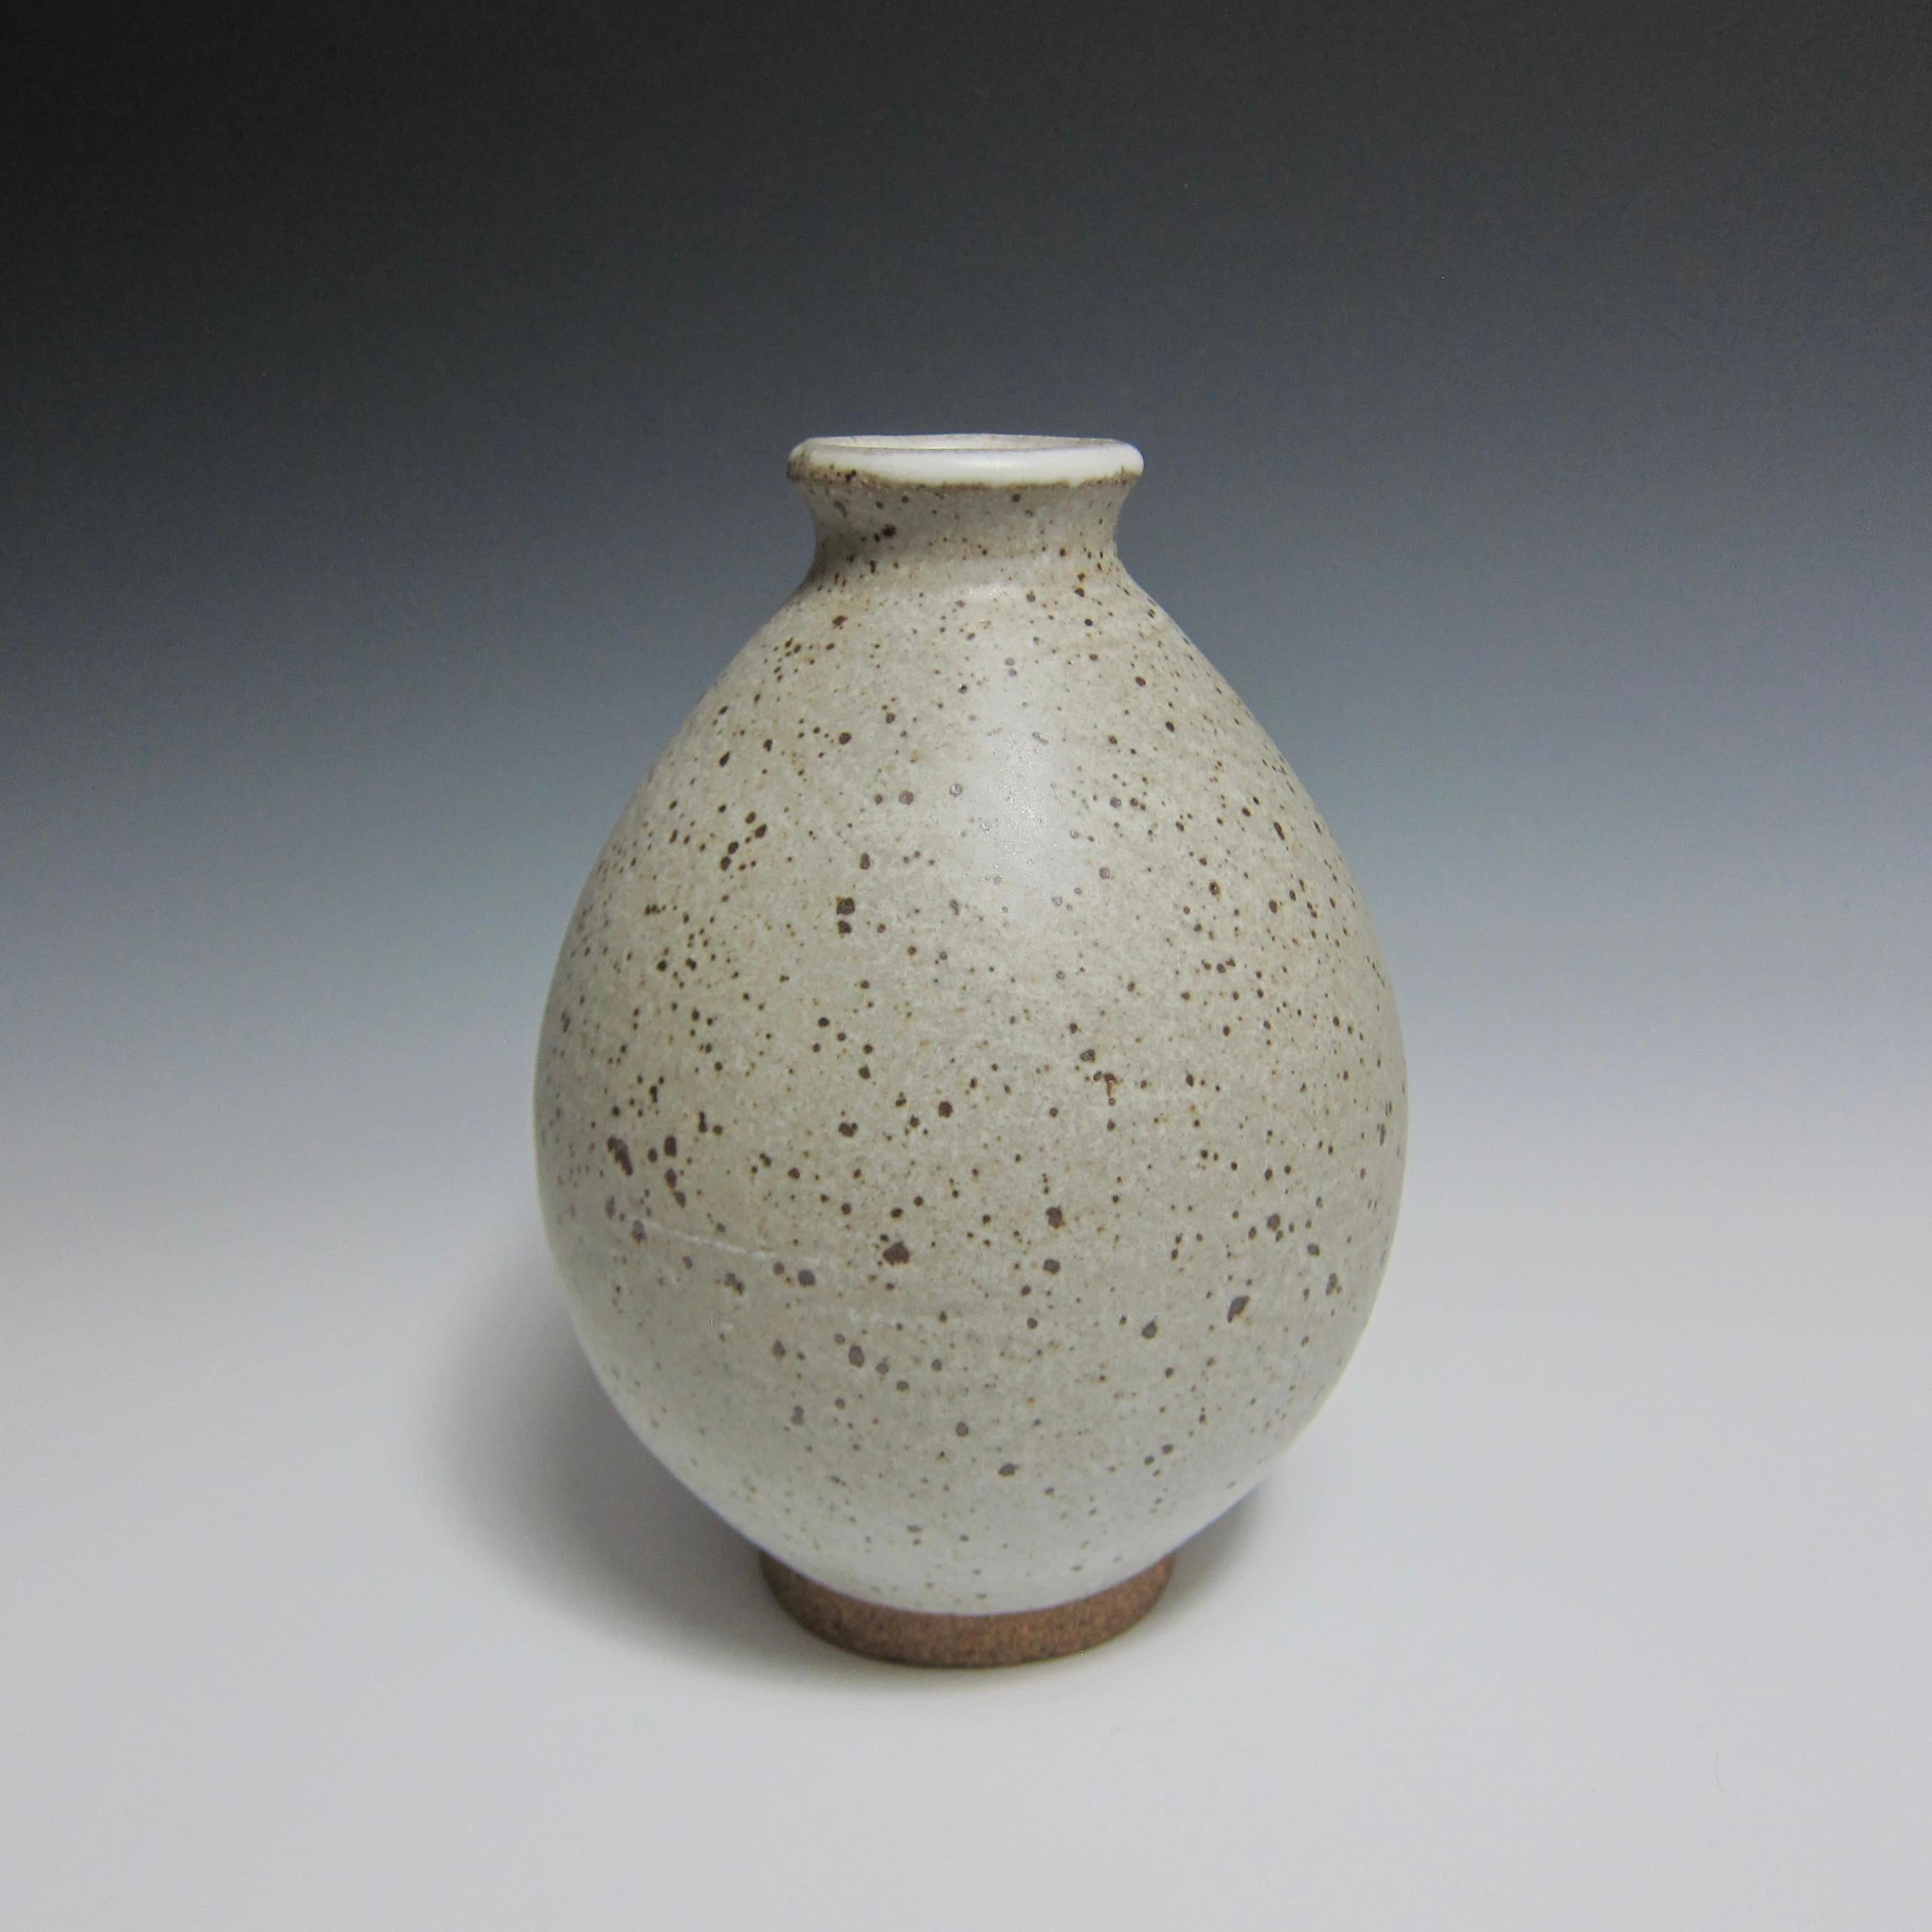 Wheel Thrown Speckled White Flower Bottle by Jason Fox.

A Southern Californian for over half his life, Contemporary Ceramic Artist Jason Fox draws upon his classical education in Architecture and Art History as well as his love of surfing and the